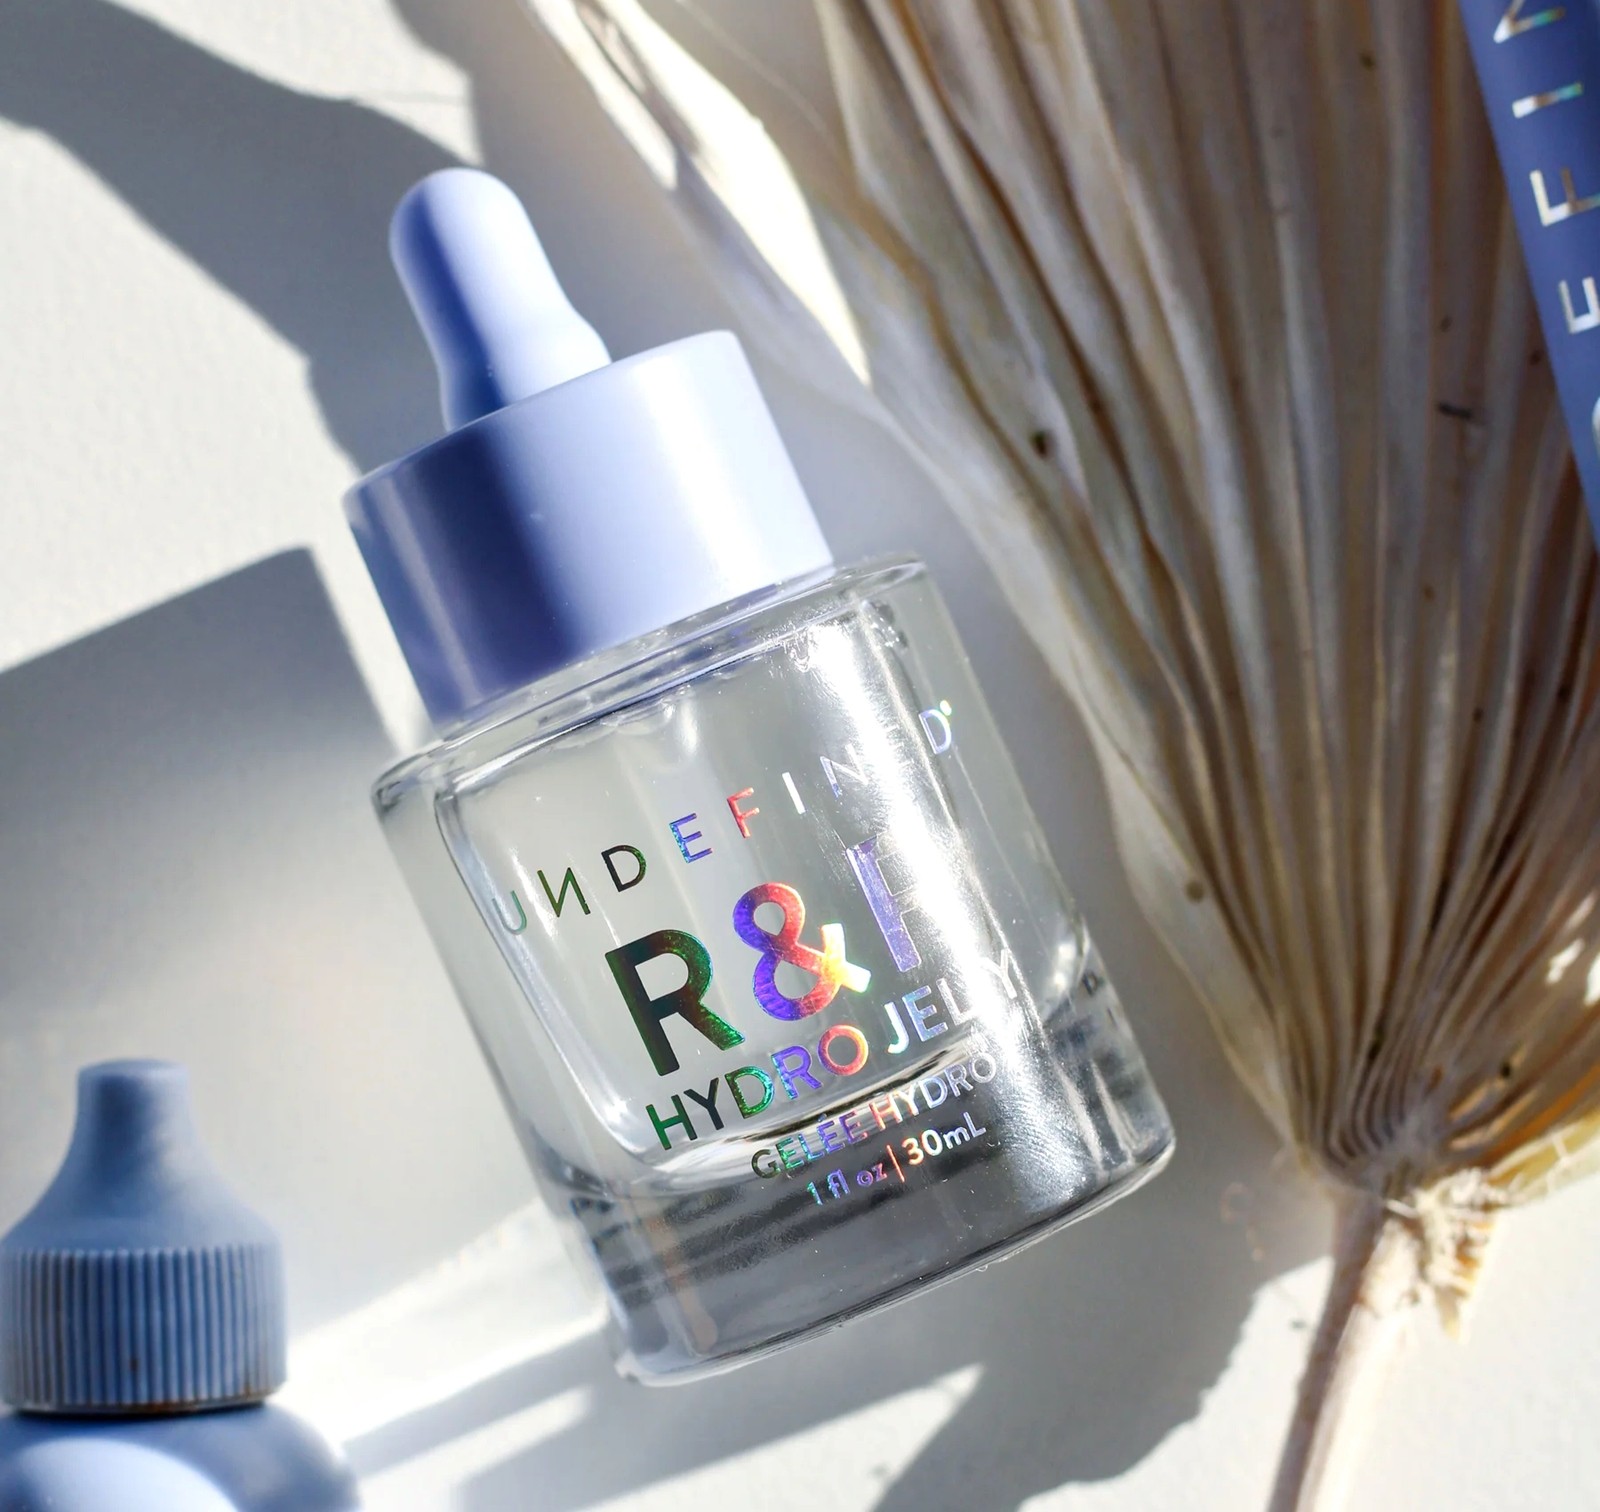 Undefined Beauty Adds R&R Hydro Jelly to Their R&R Collection